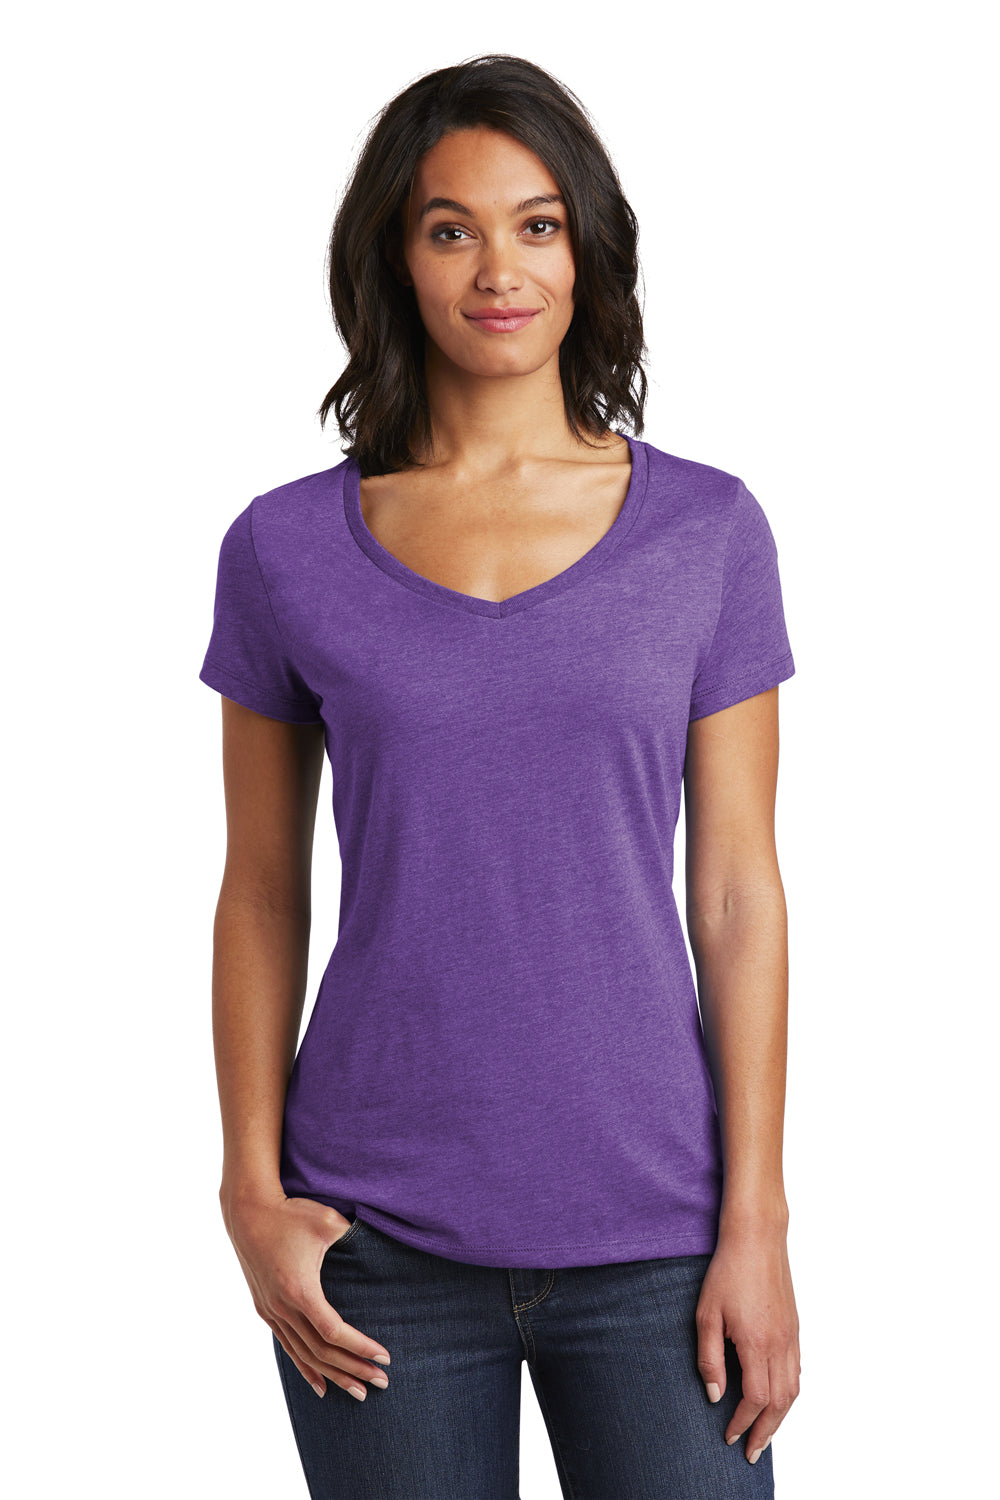 District DT6503 Womens Very Important Short Sleeve V-Neck T-Shirt Heather Purple Front